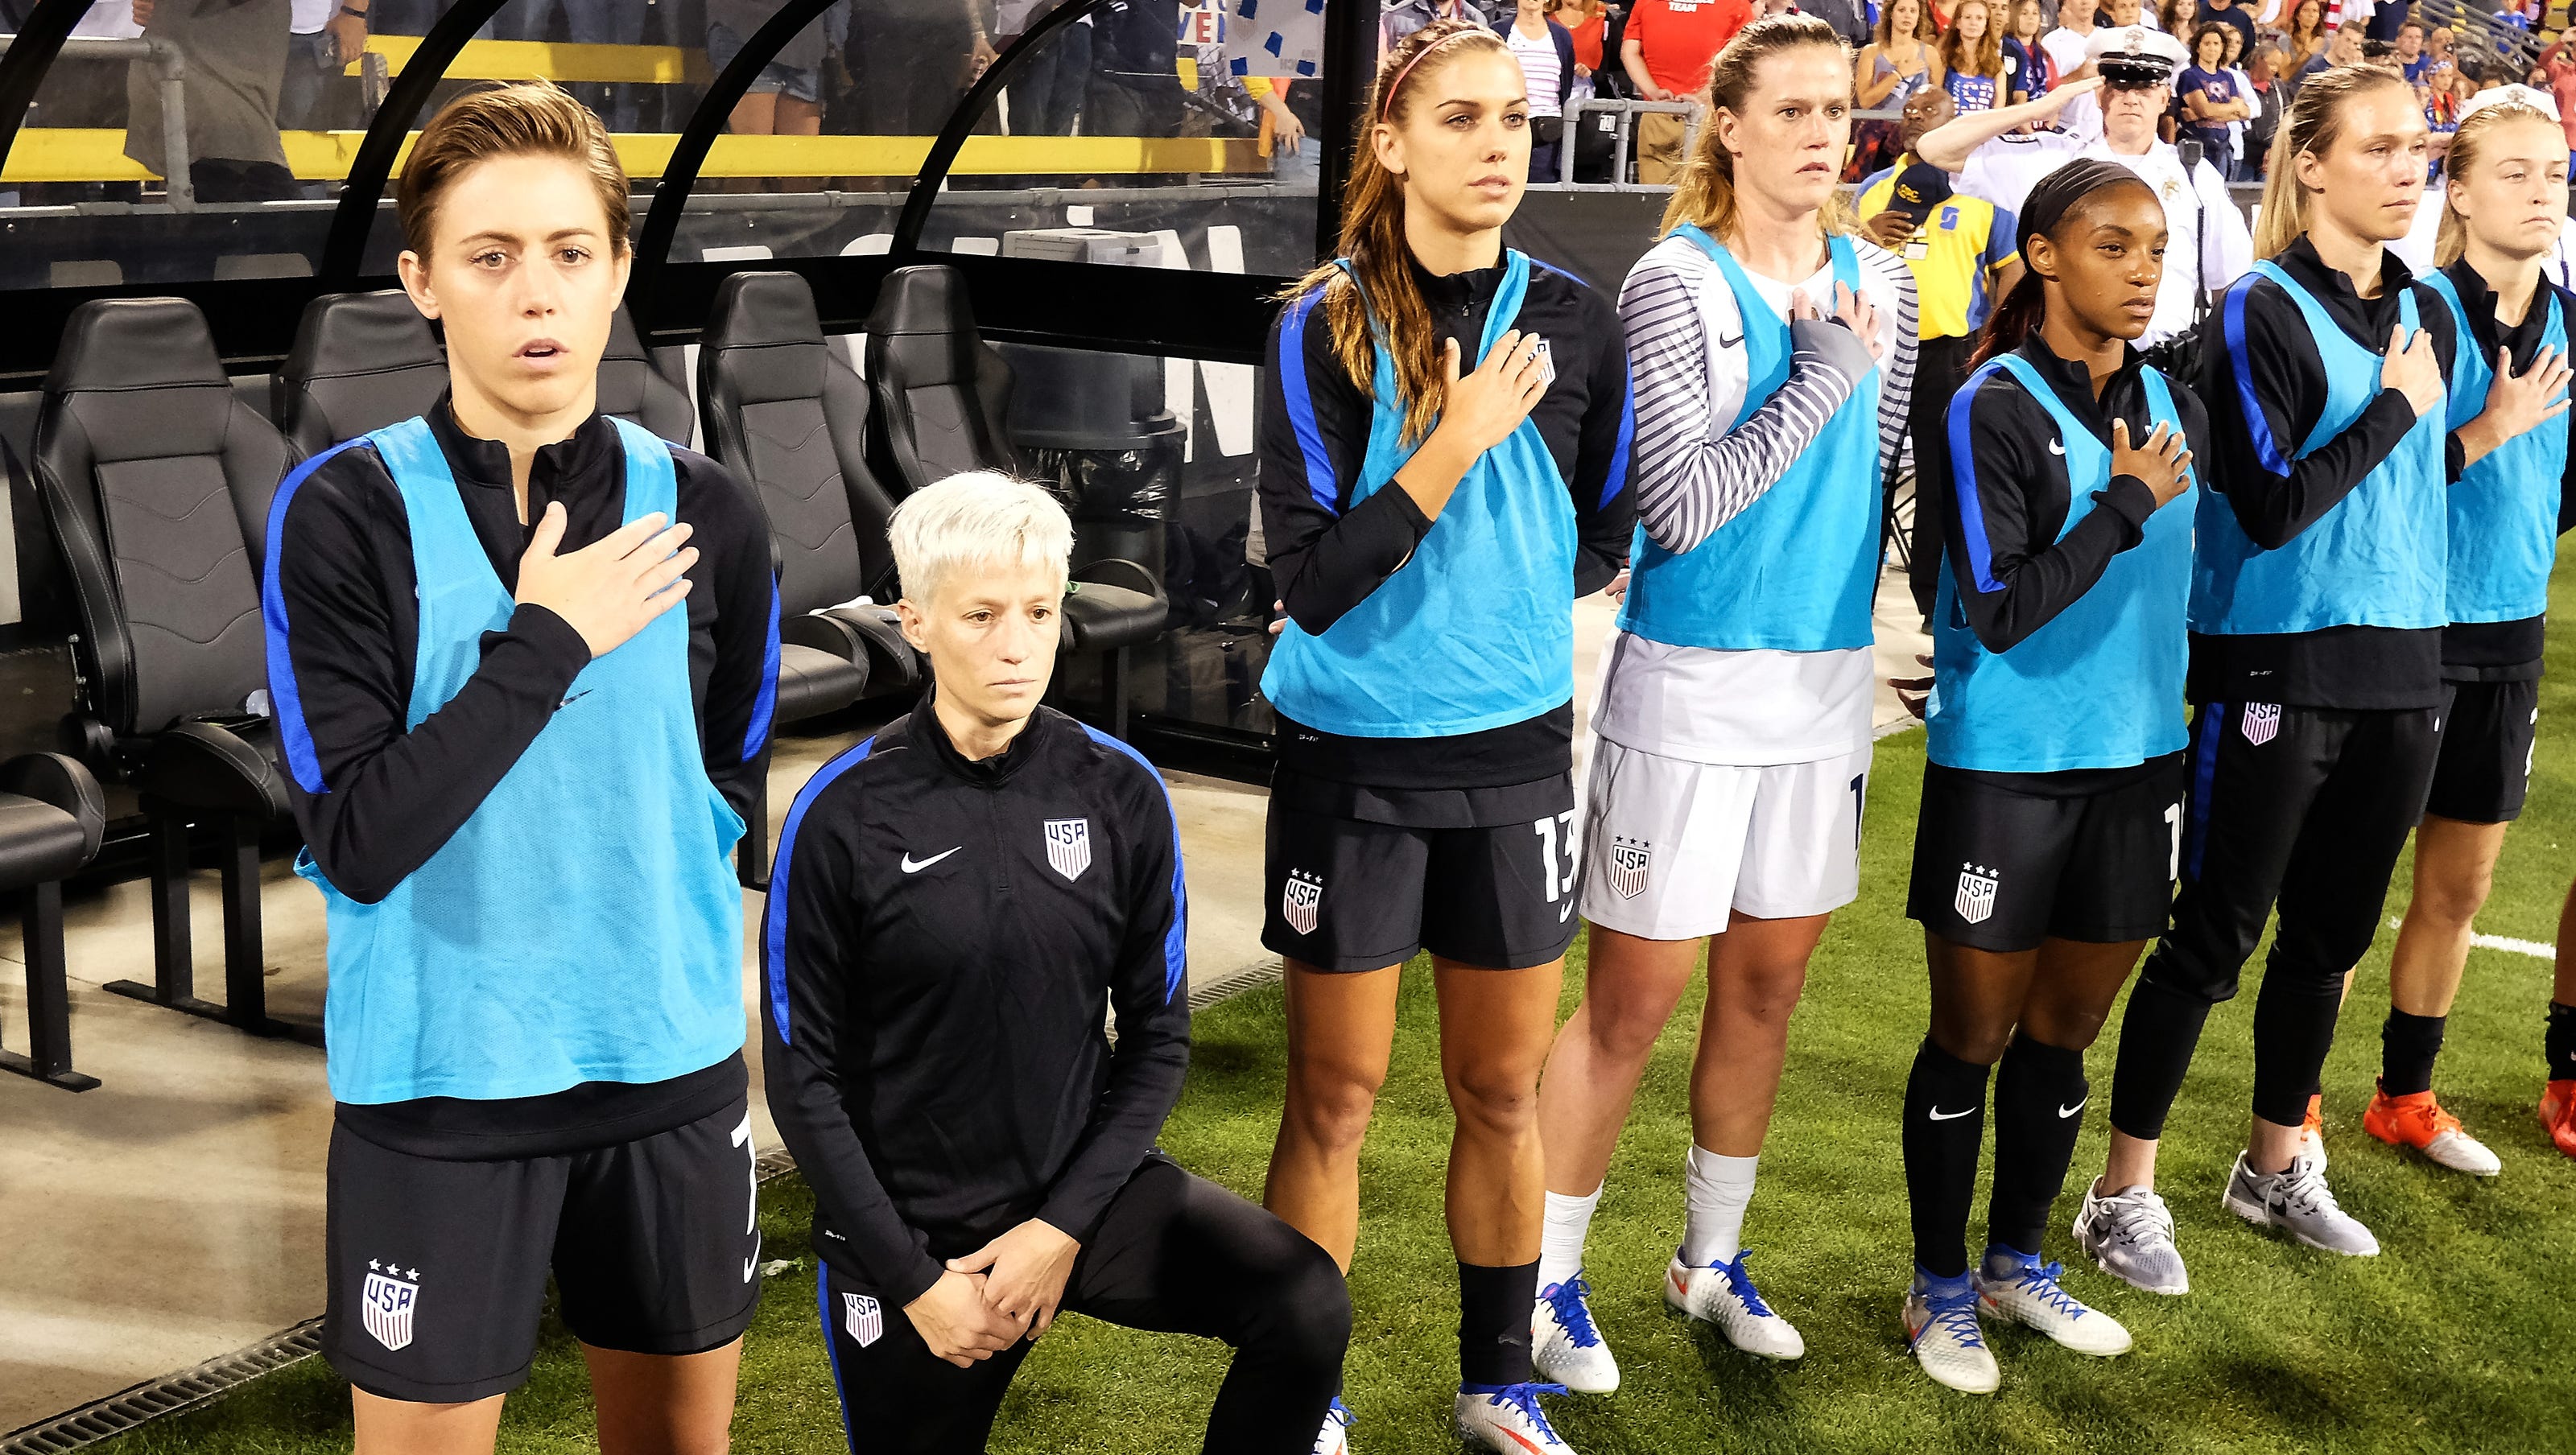 Megan Rapinoe On Why She Kneels During National Anthem